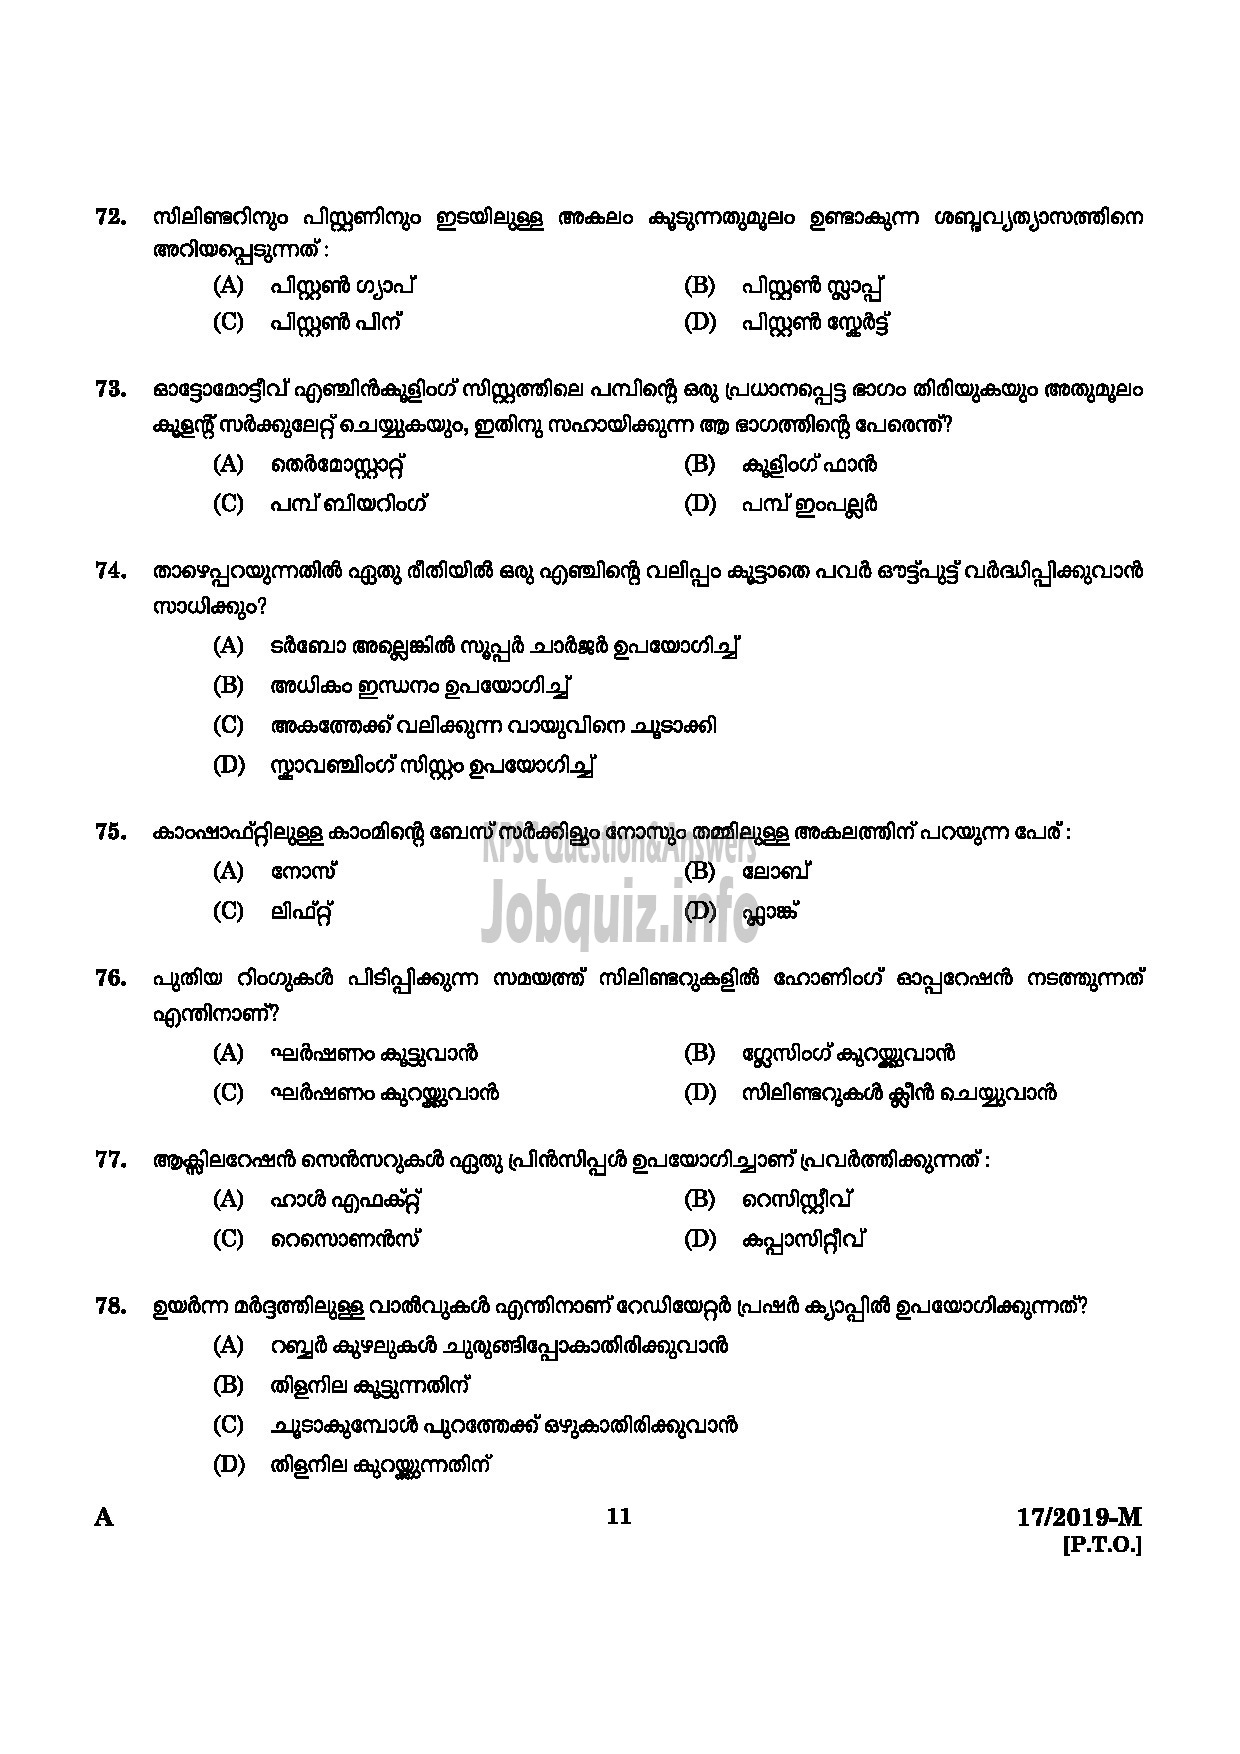 Kerala PSC Question Paper - WORKSHOP ATTENDER MECHANIC MOTOR VEHICLE SR FOR STONLY INDUSTRIAL TRAINING DEPARTMENT MALAYALAM-9